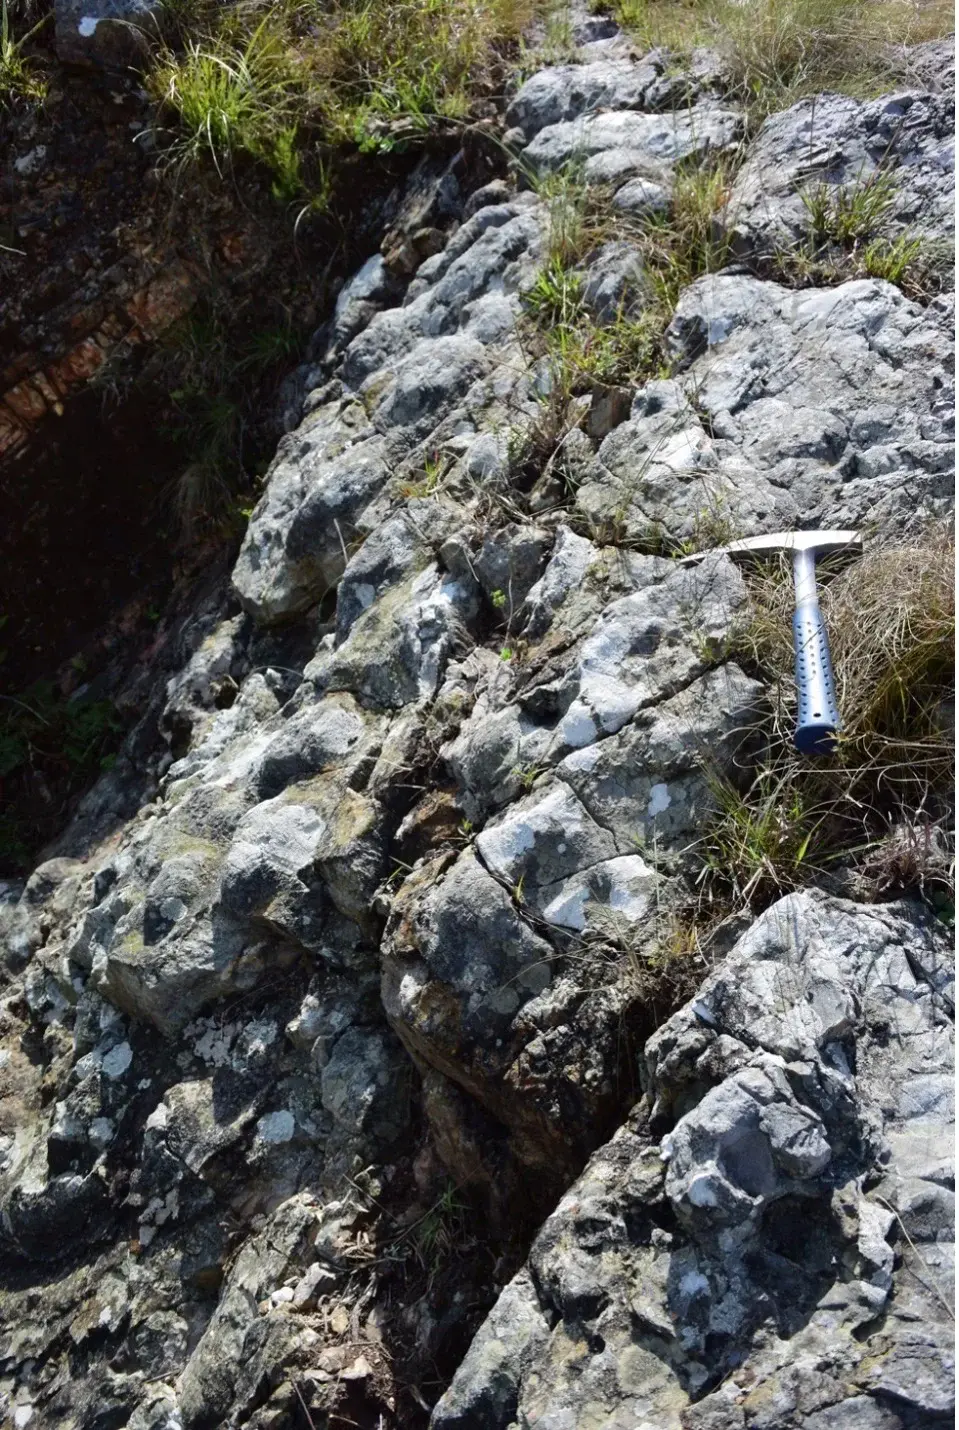 Ancient barite outcrop in South Africa (Credit: Desiree Roerdink)